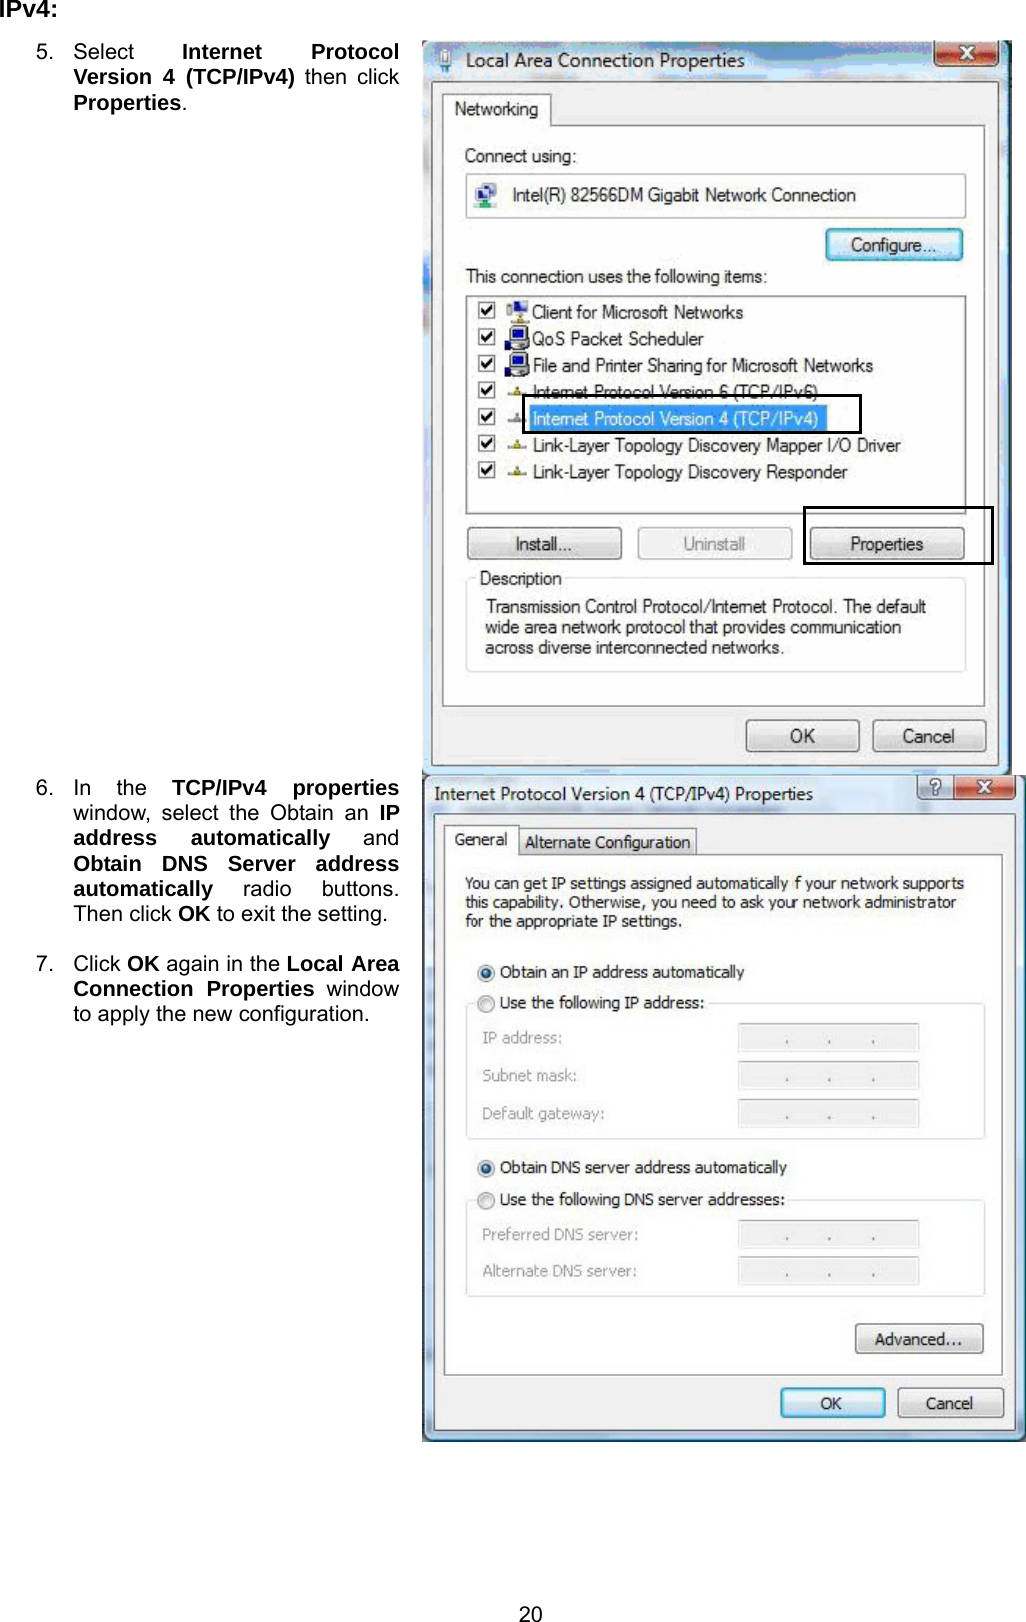  20 IPv4:      5. Select  Internet Protocol Version 4 (TCP/IPv4) then click Properties.  6. In  the  TCP/IPv4 properties window, select the Obtain an IP address automatically and Obtain DNS Server address automatically radio buttons. Then click OK to exit the setting.  7. Click OK again in the Local Area Connection Properties window to apply the new configuration. 